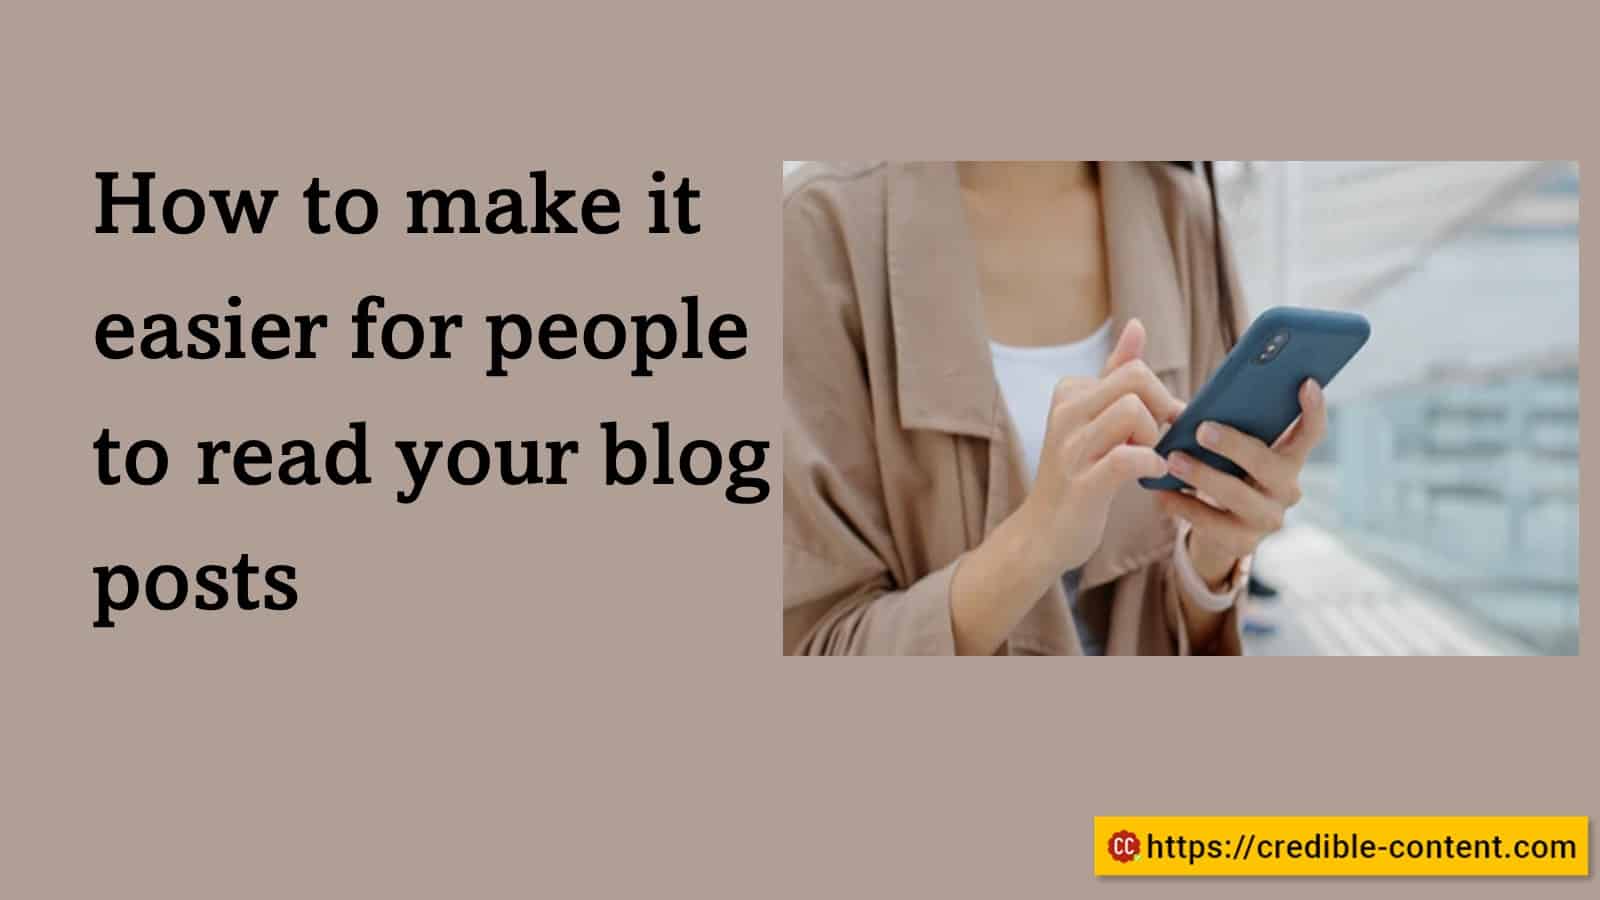 How to make it easier for people to read your blog posts